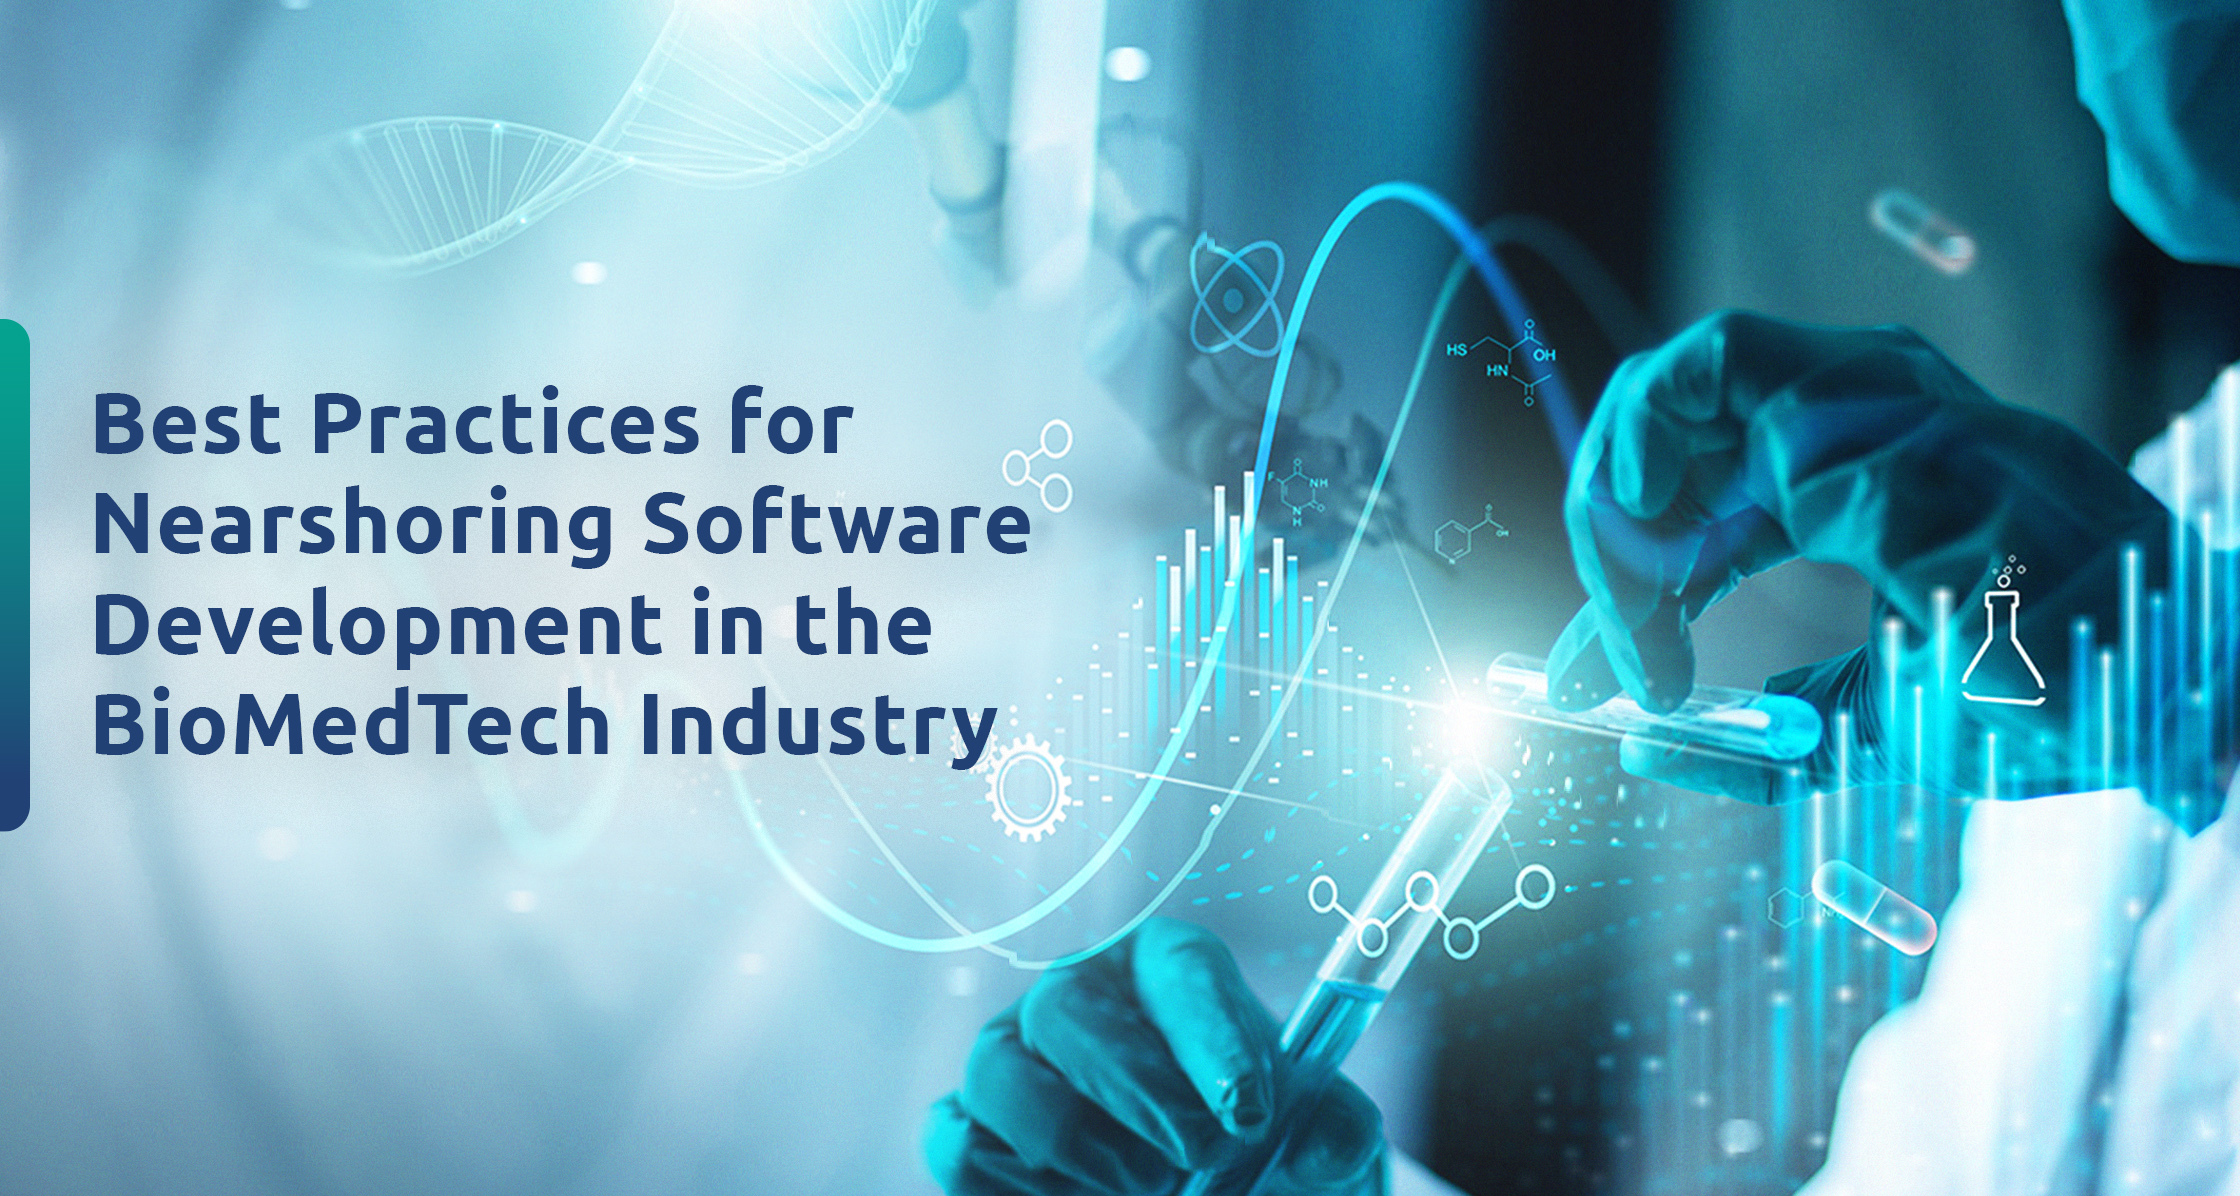 Best practices for nearshoring software development in biotech and healthtech industry